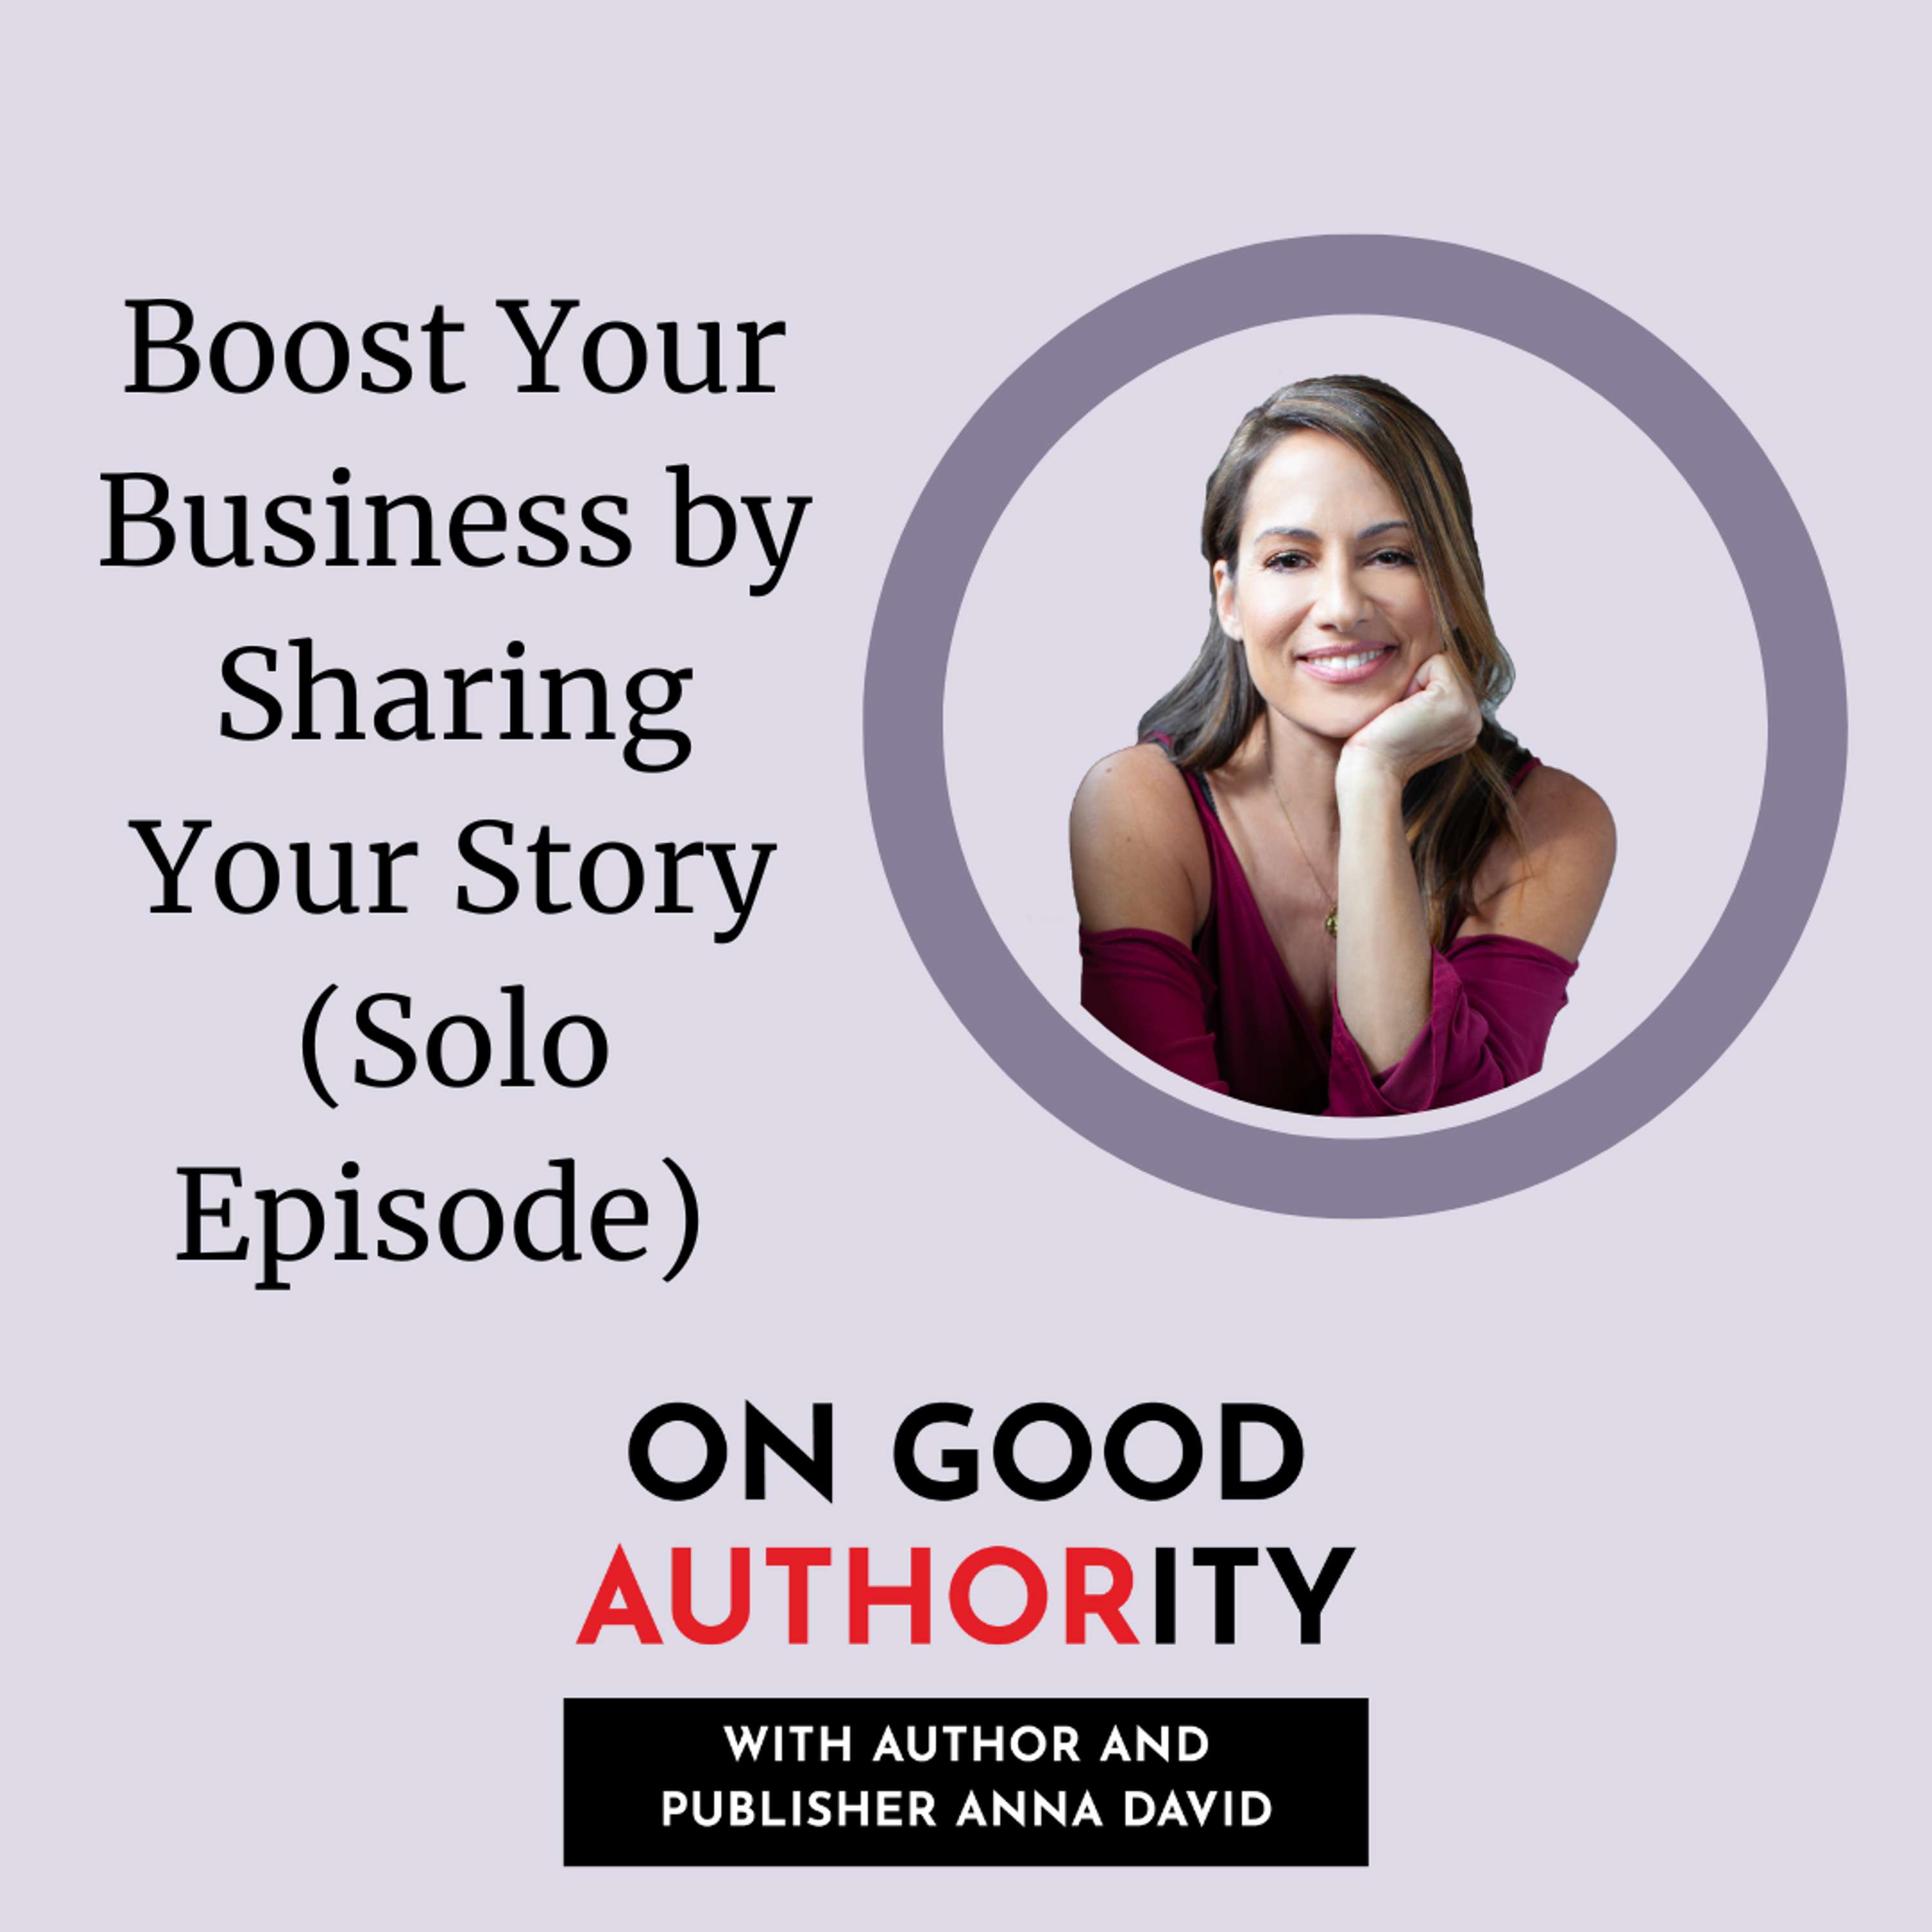 Boost Your Business by Sharing Your Story (Solo Episode)